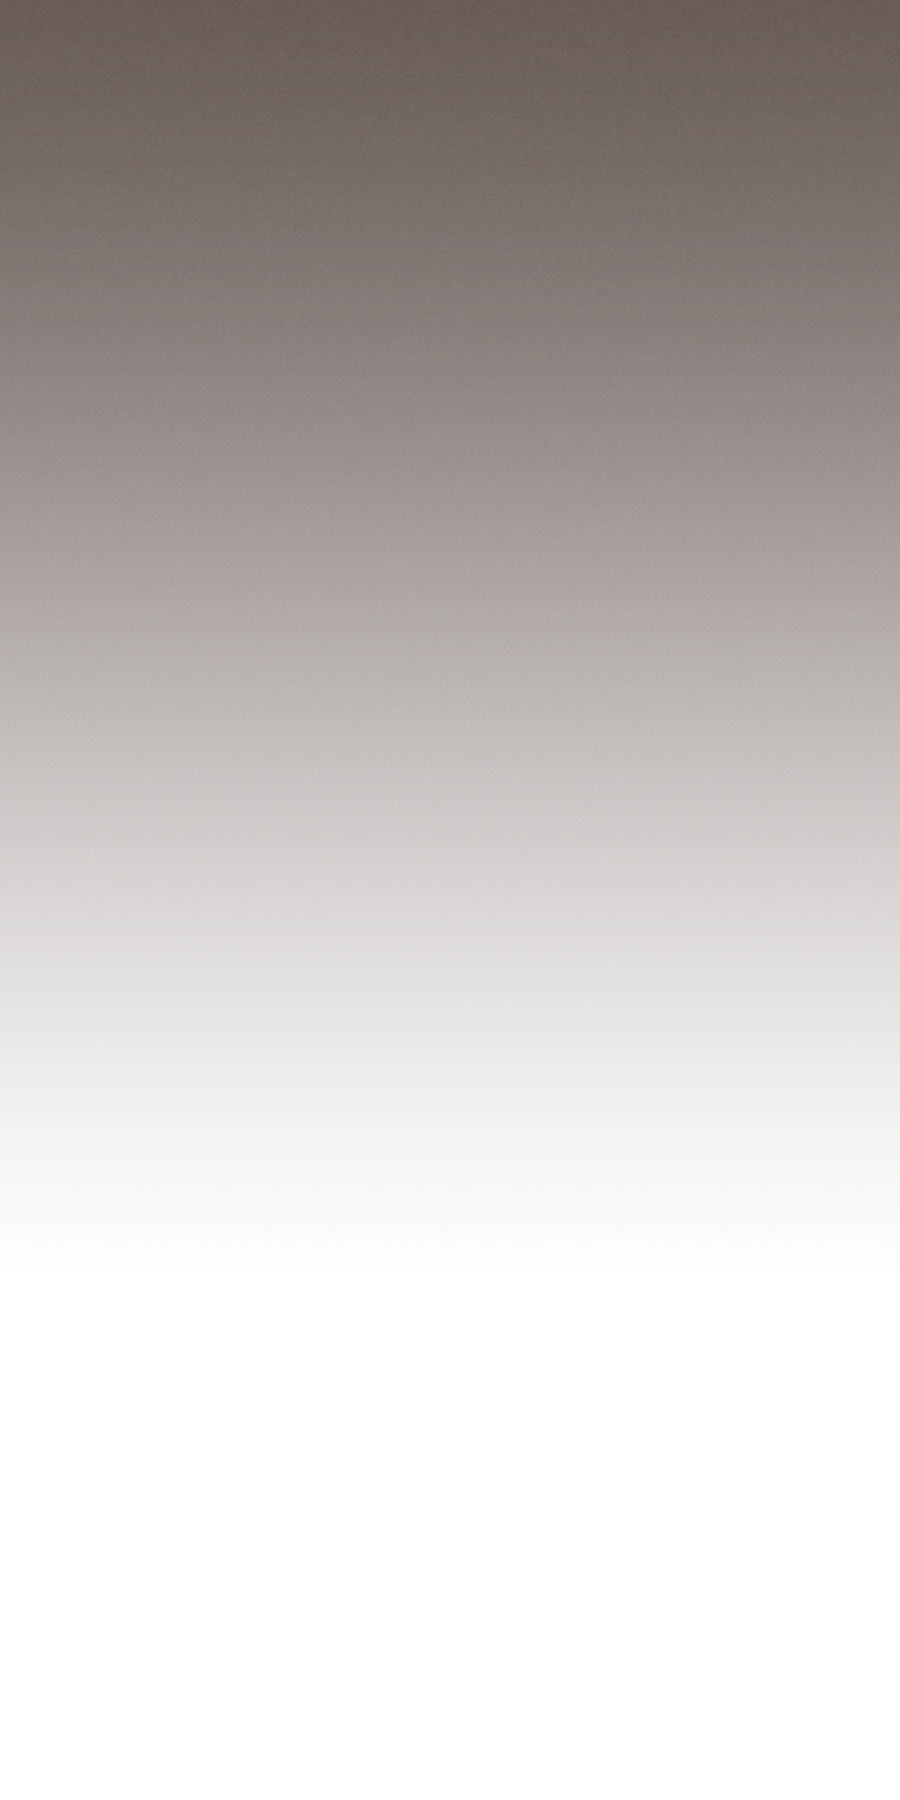 Grey gradient that fades to white at the bottom